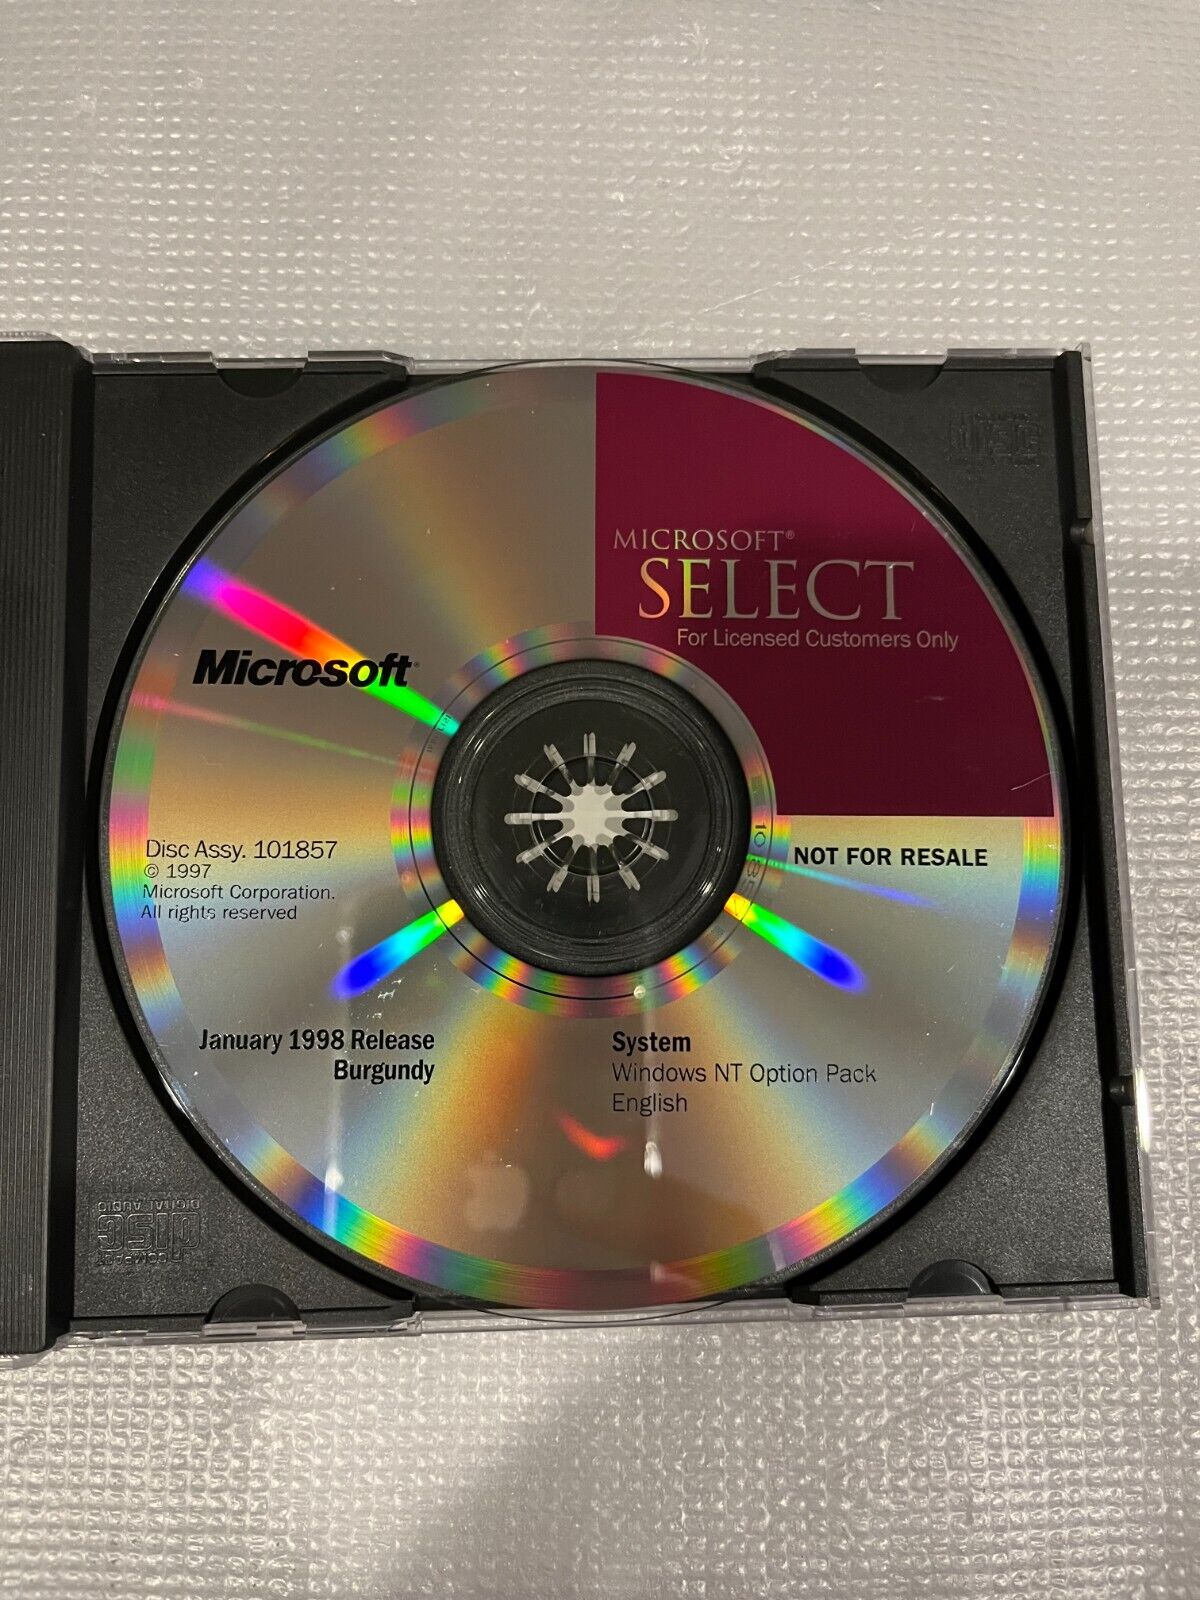 Microsoft Select, System - Windows NT Option Pack, January 1998 Release Burgundy